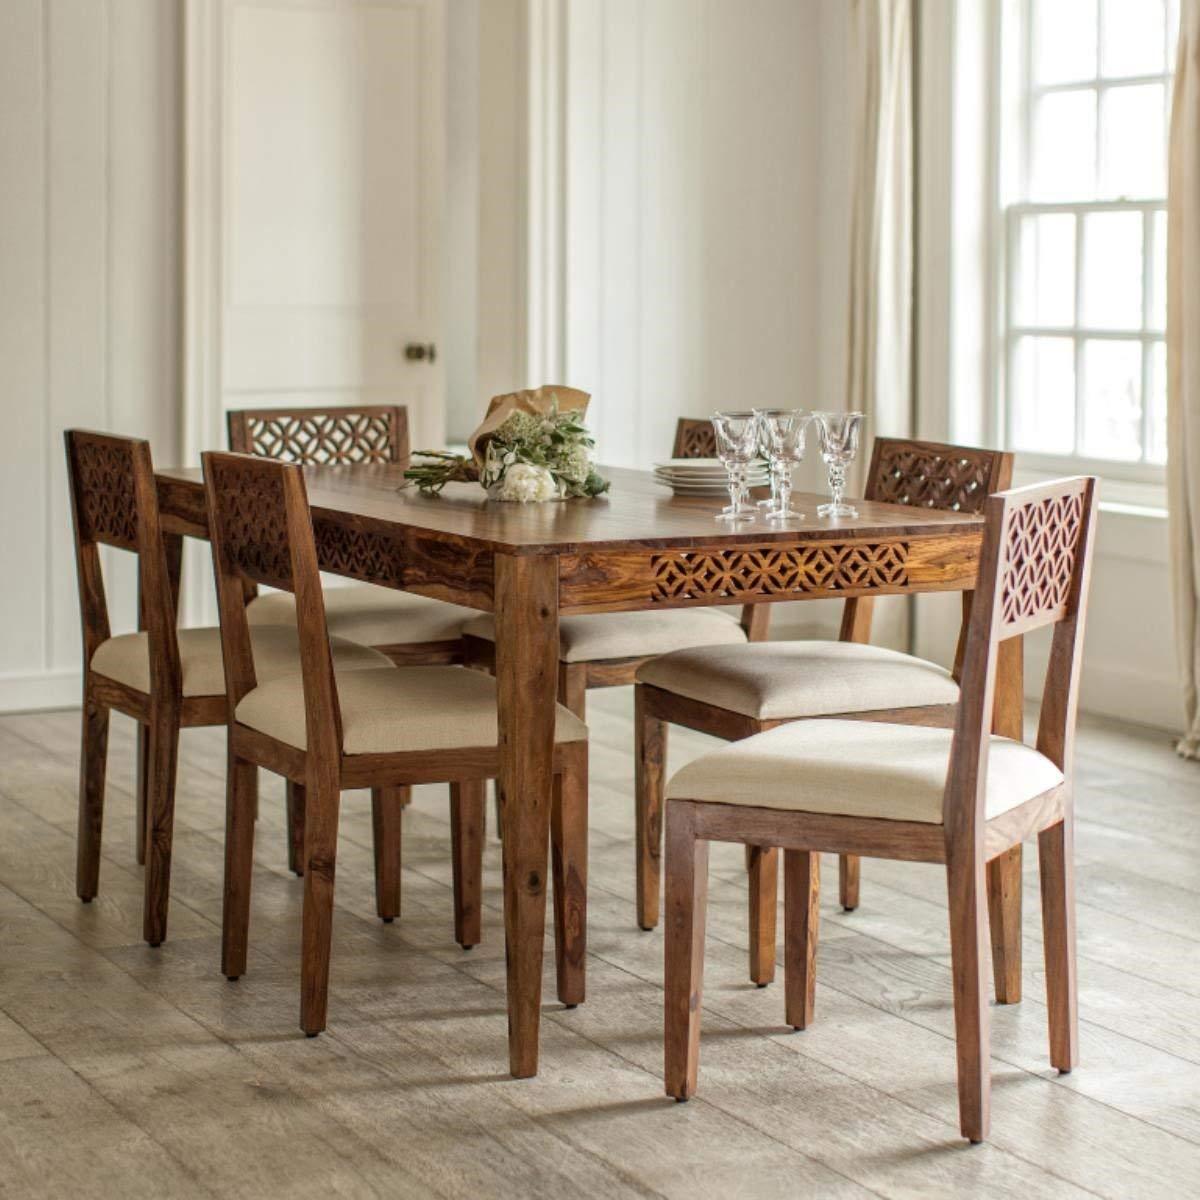 Dining Table Set: Buy Wooden Dining Table Chair Bench Set Online In Best  Designs - Furniture Online: Buy Wooden Furniture For Every Home | Sunrise  International